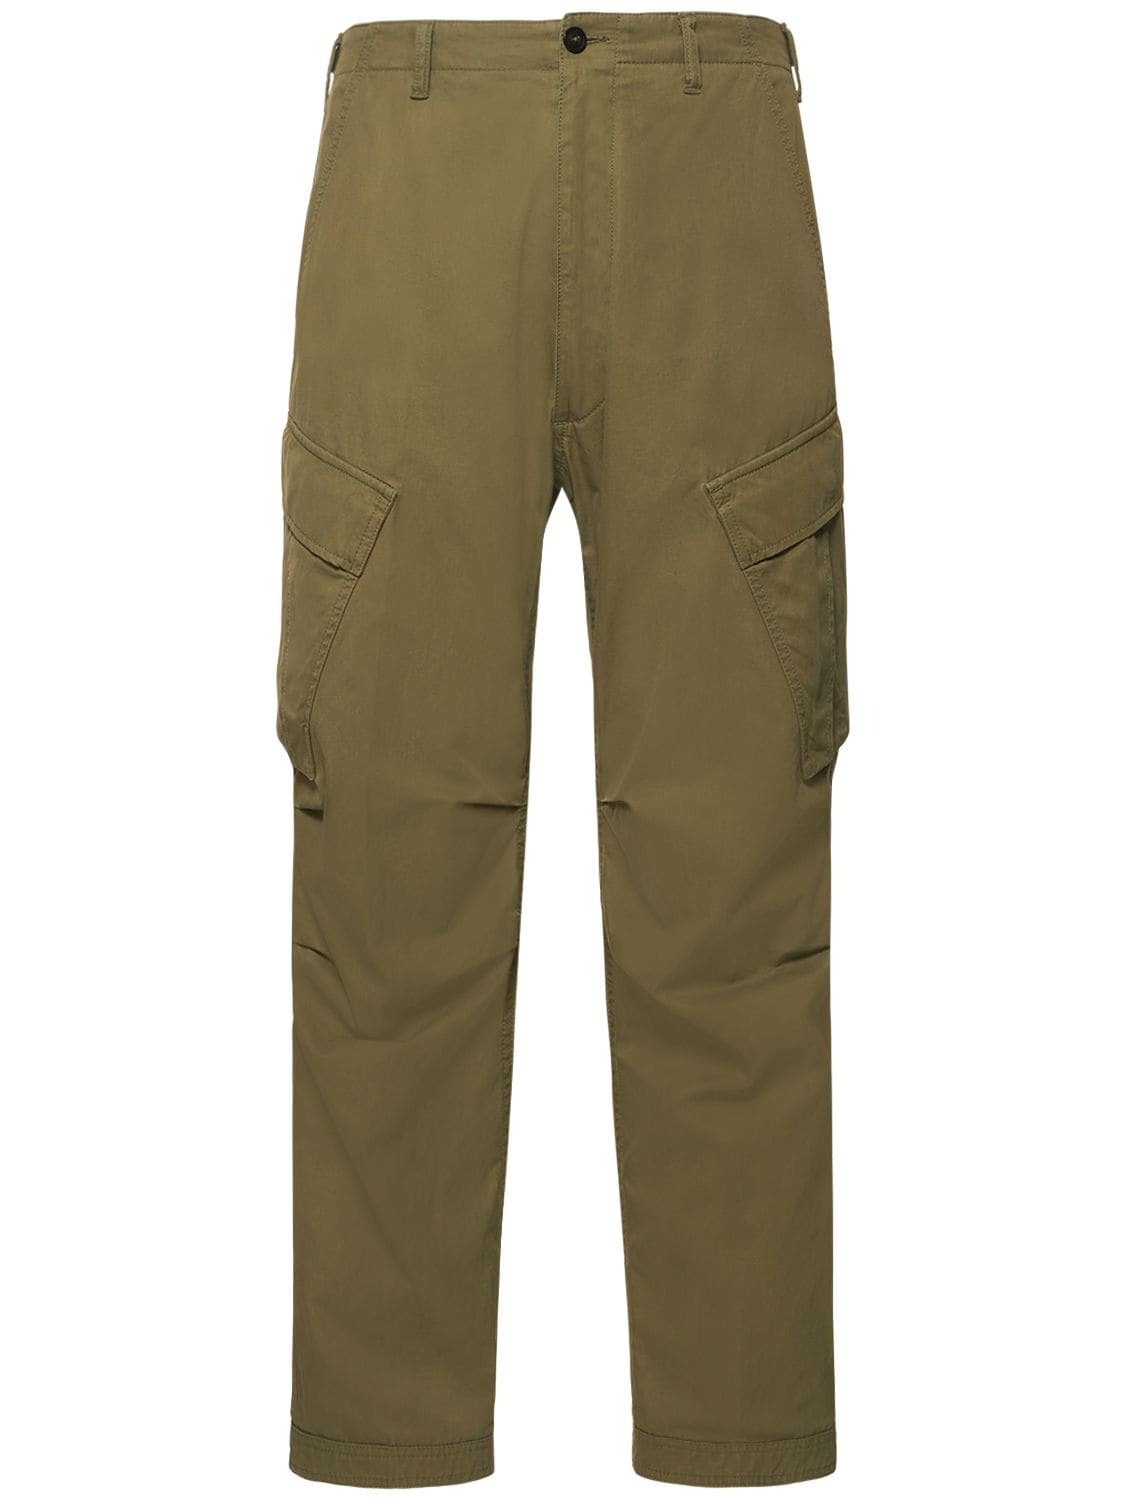 Tom Ford Enzyme Twill Cargo Sport Pants In Sage